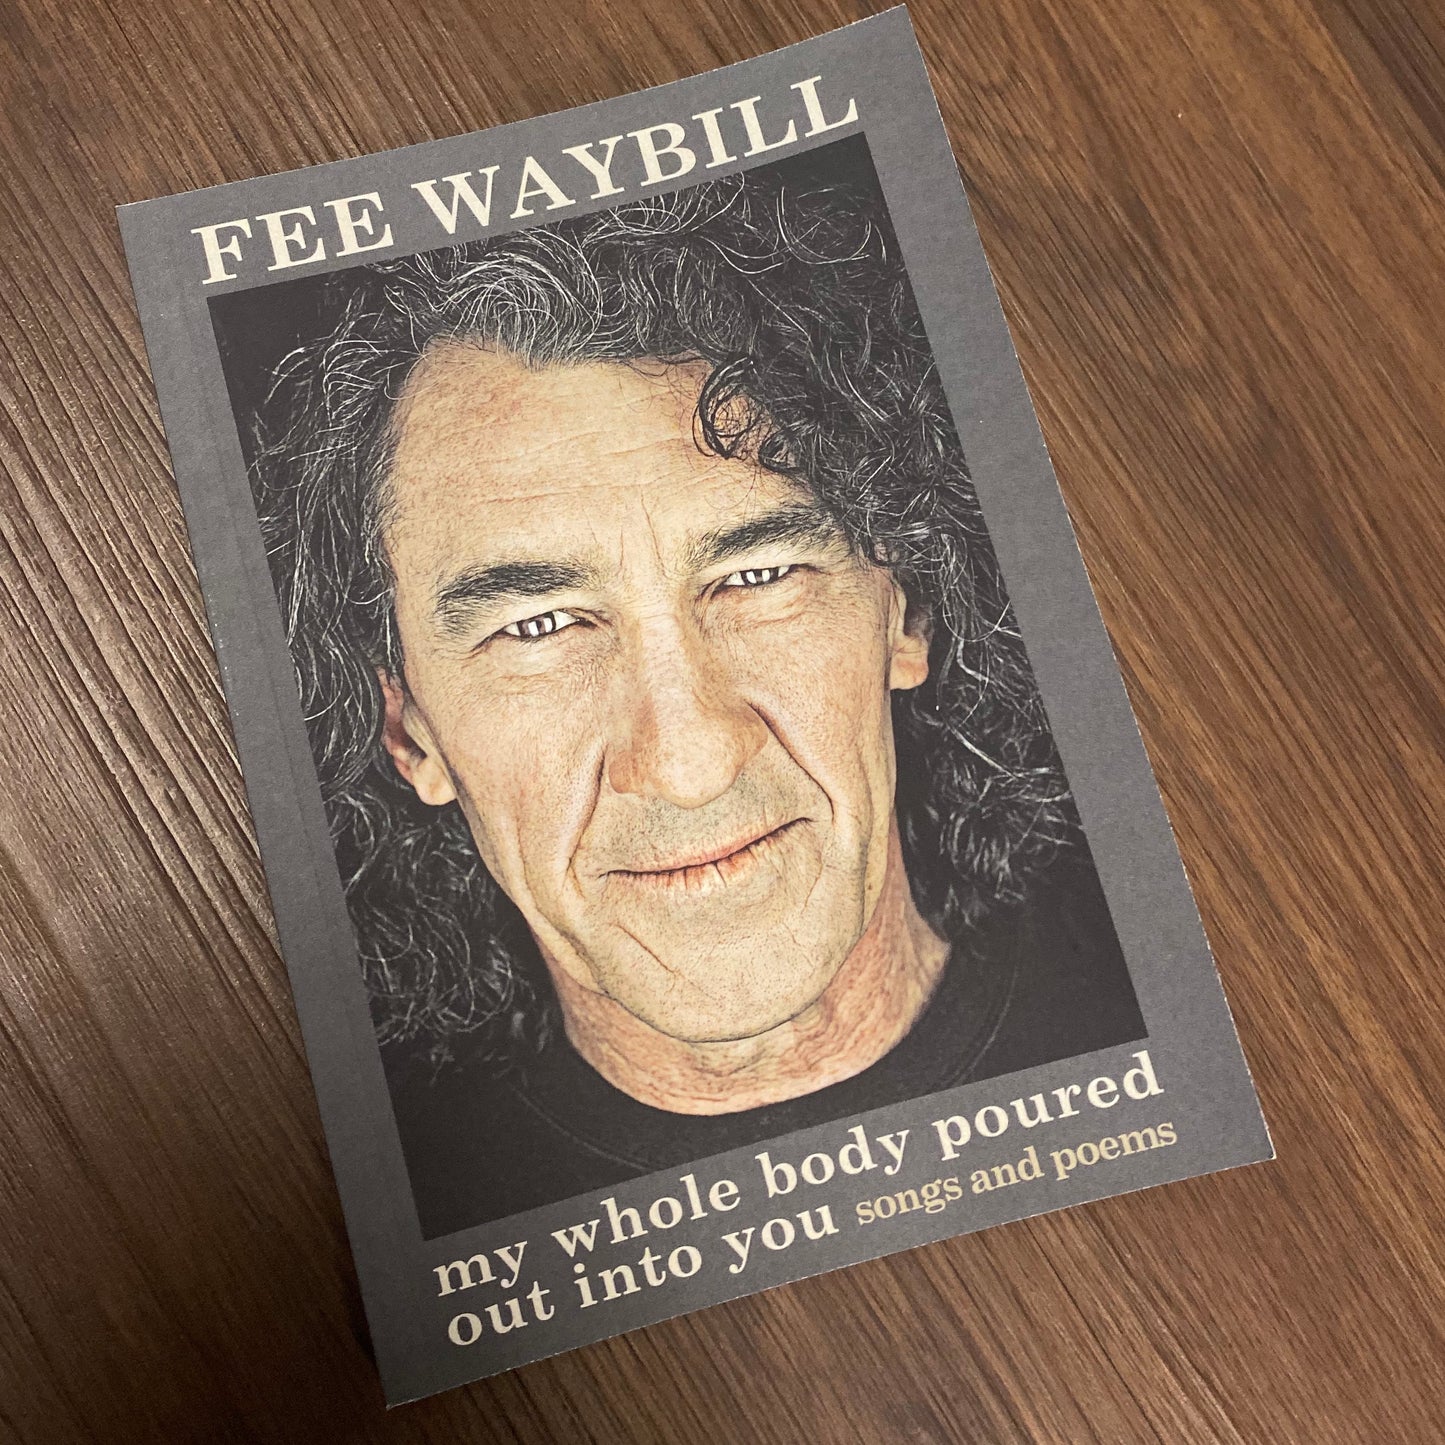 Fee Waybill: My Whole Body Poured Out Into You (Songs and Poems)